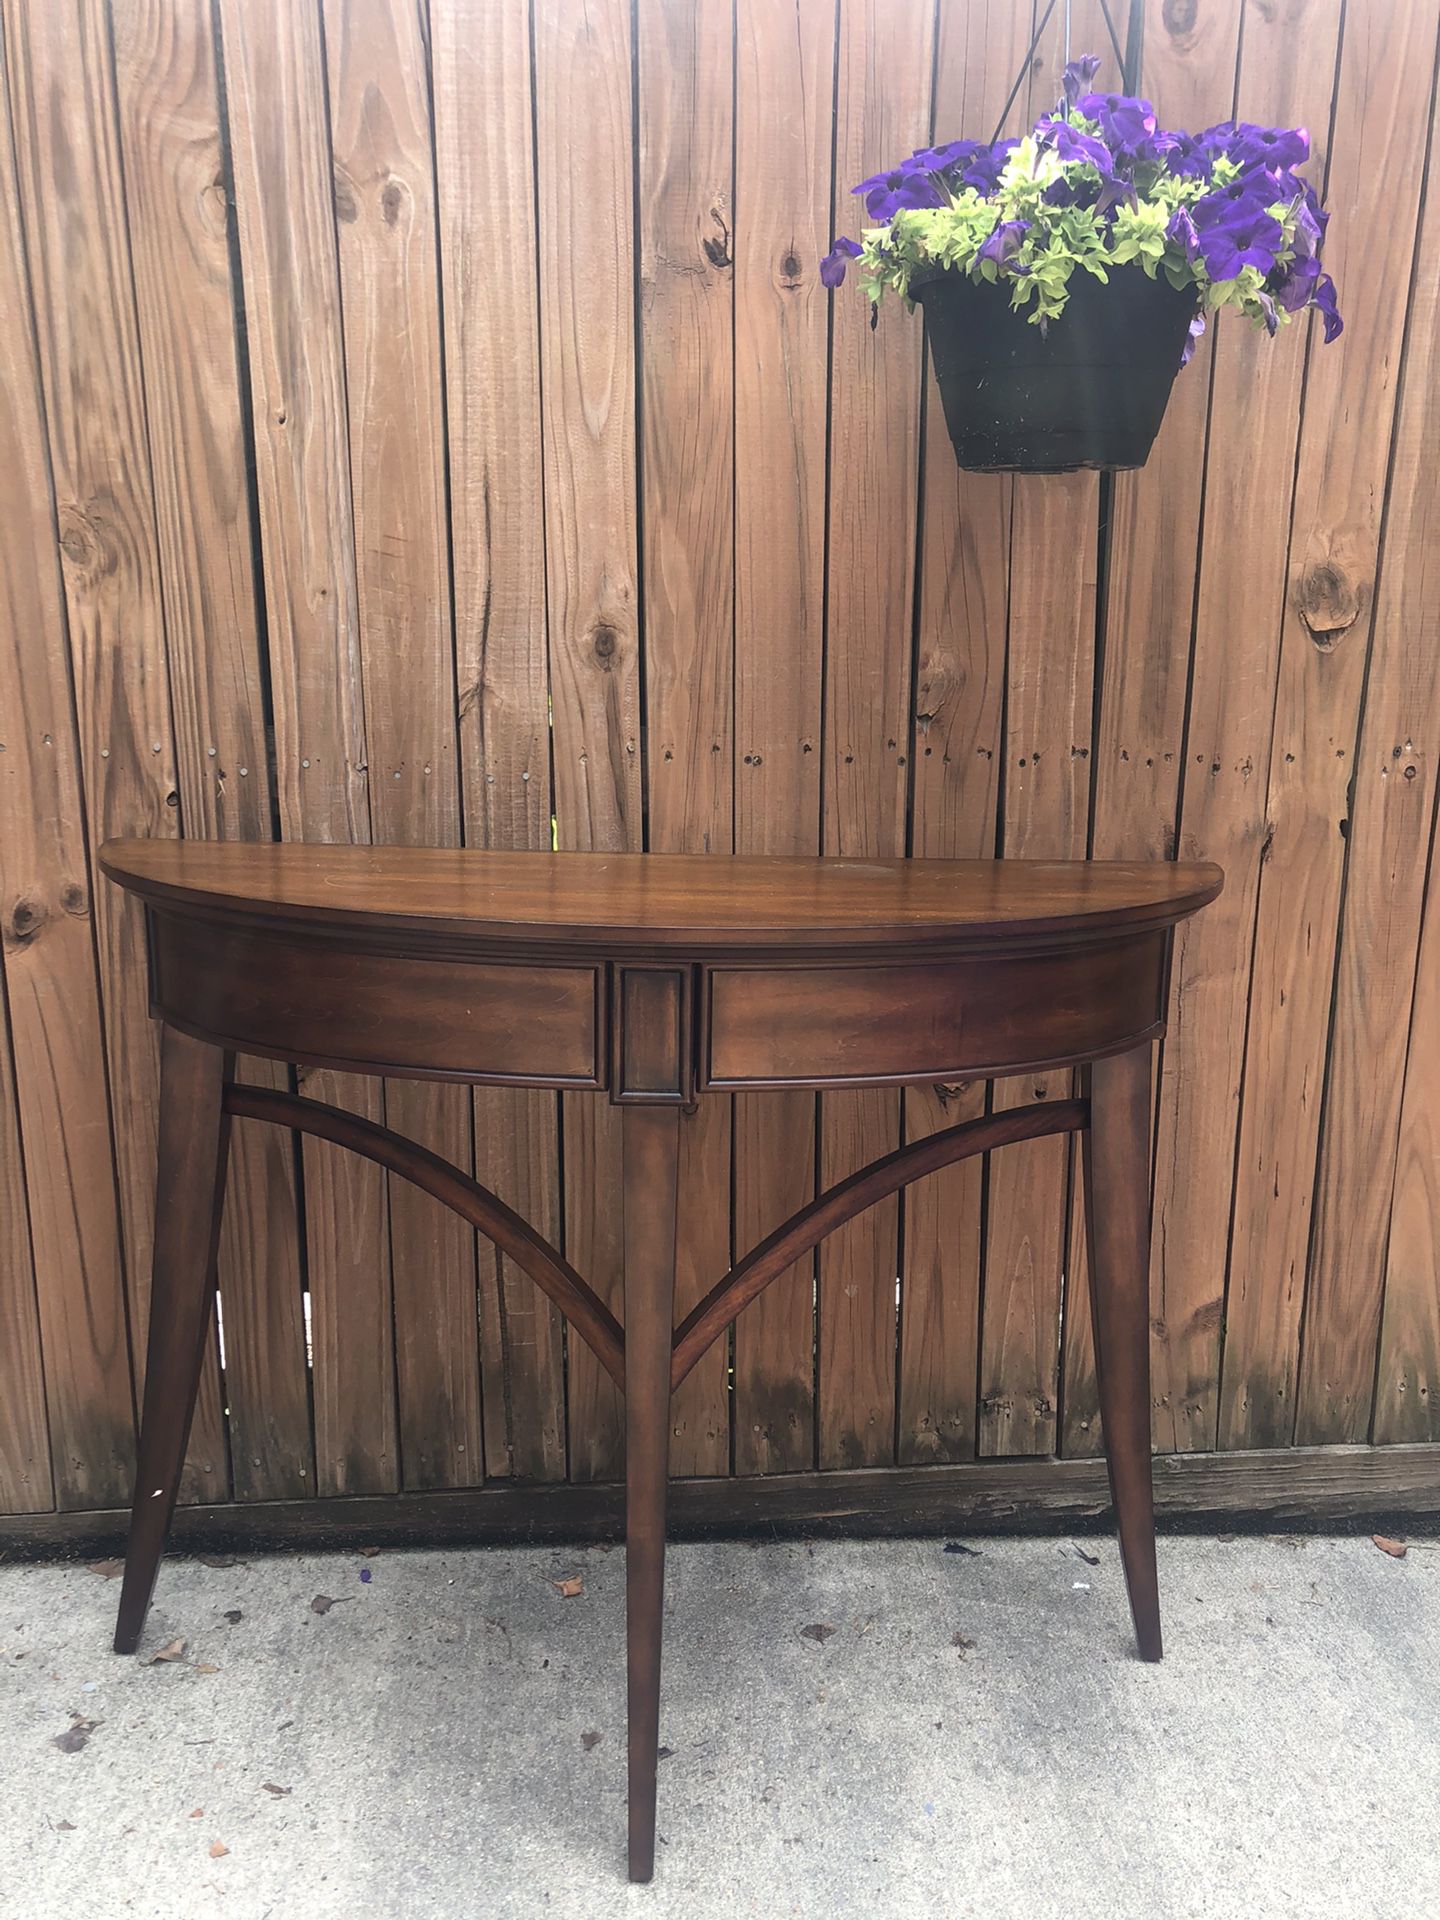 Entry way table or side table